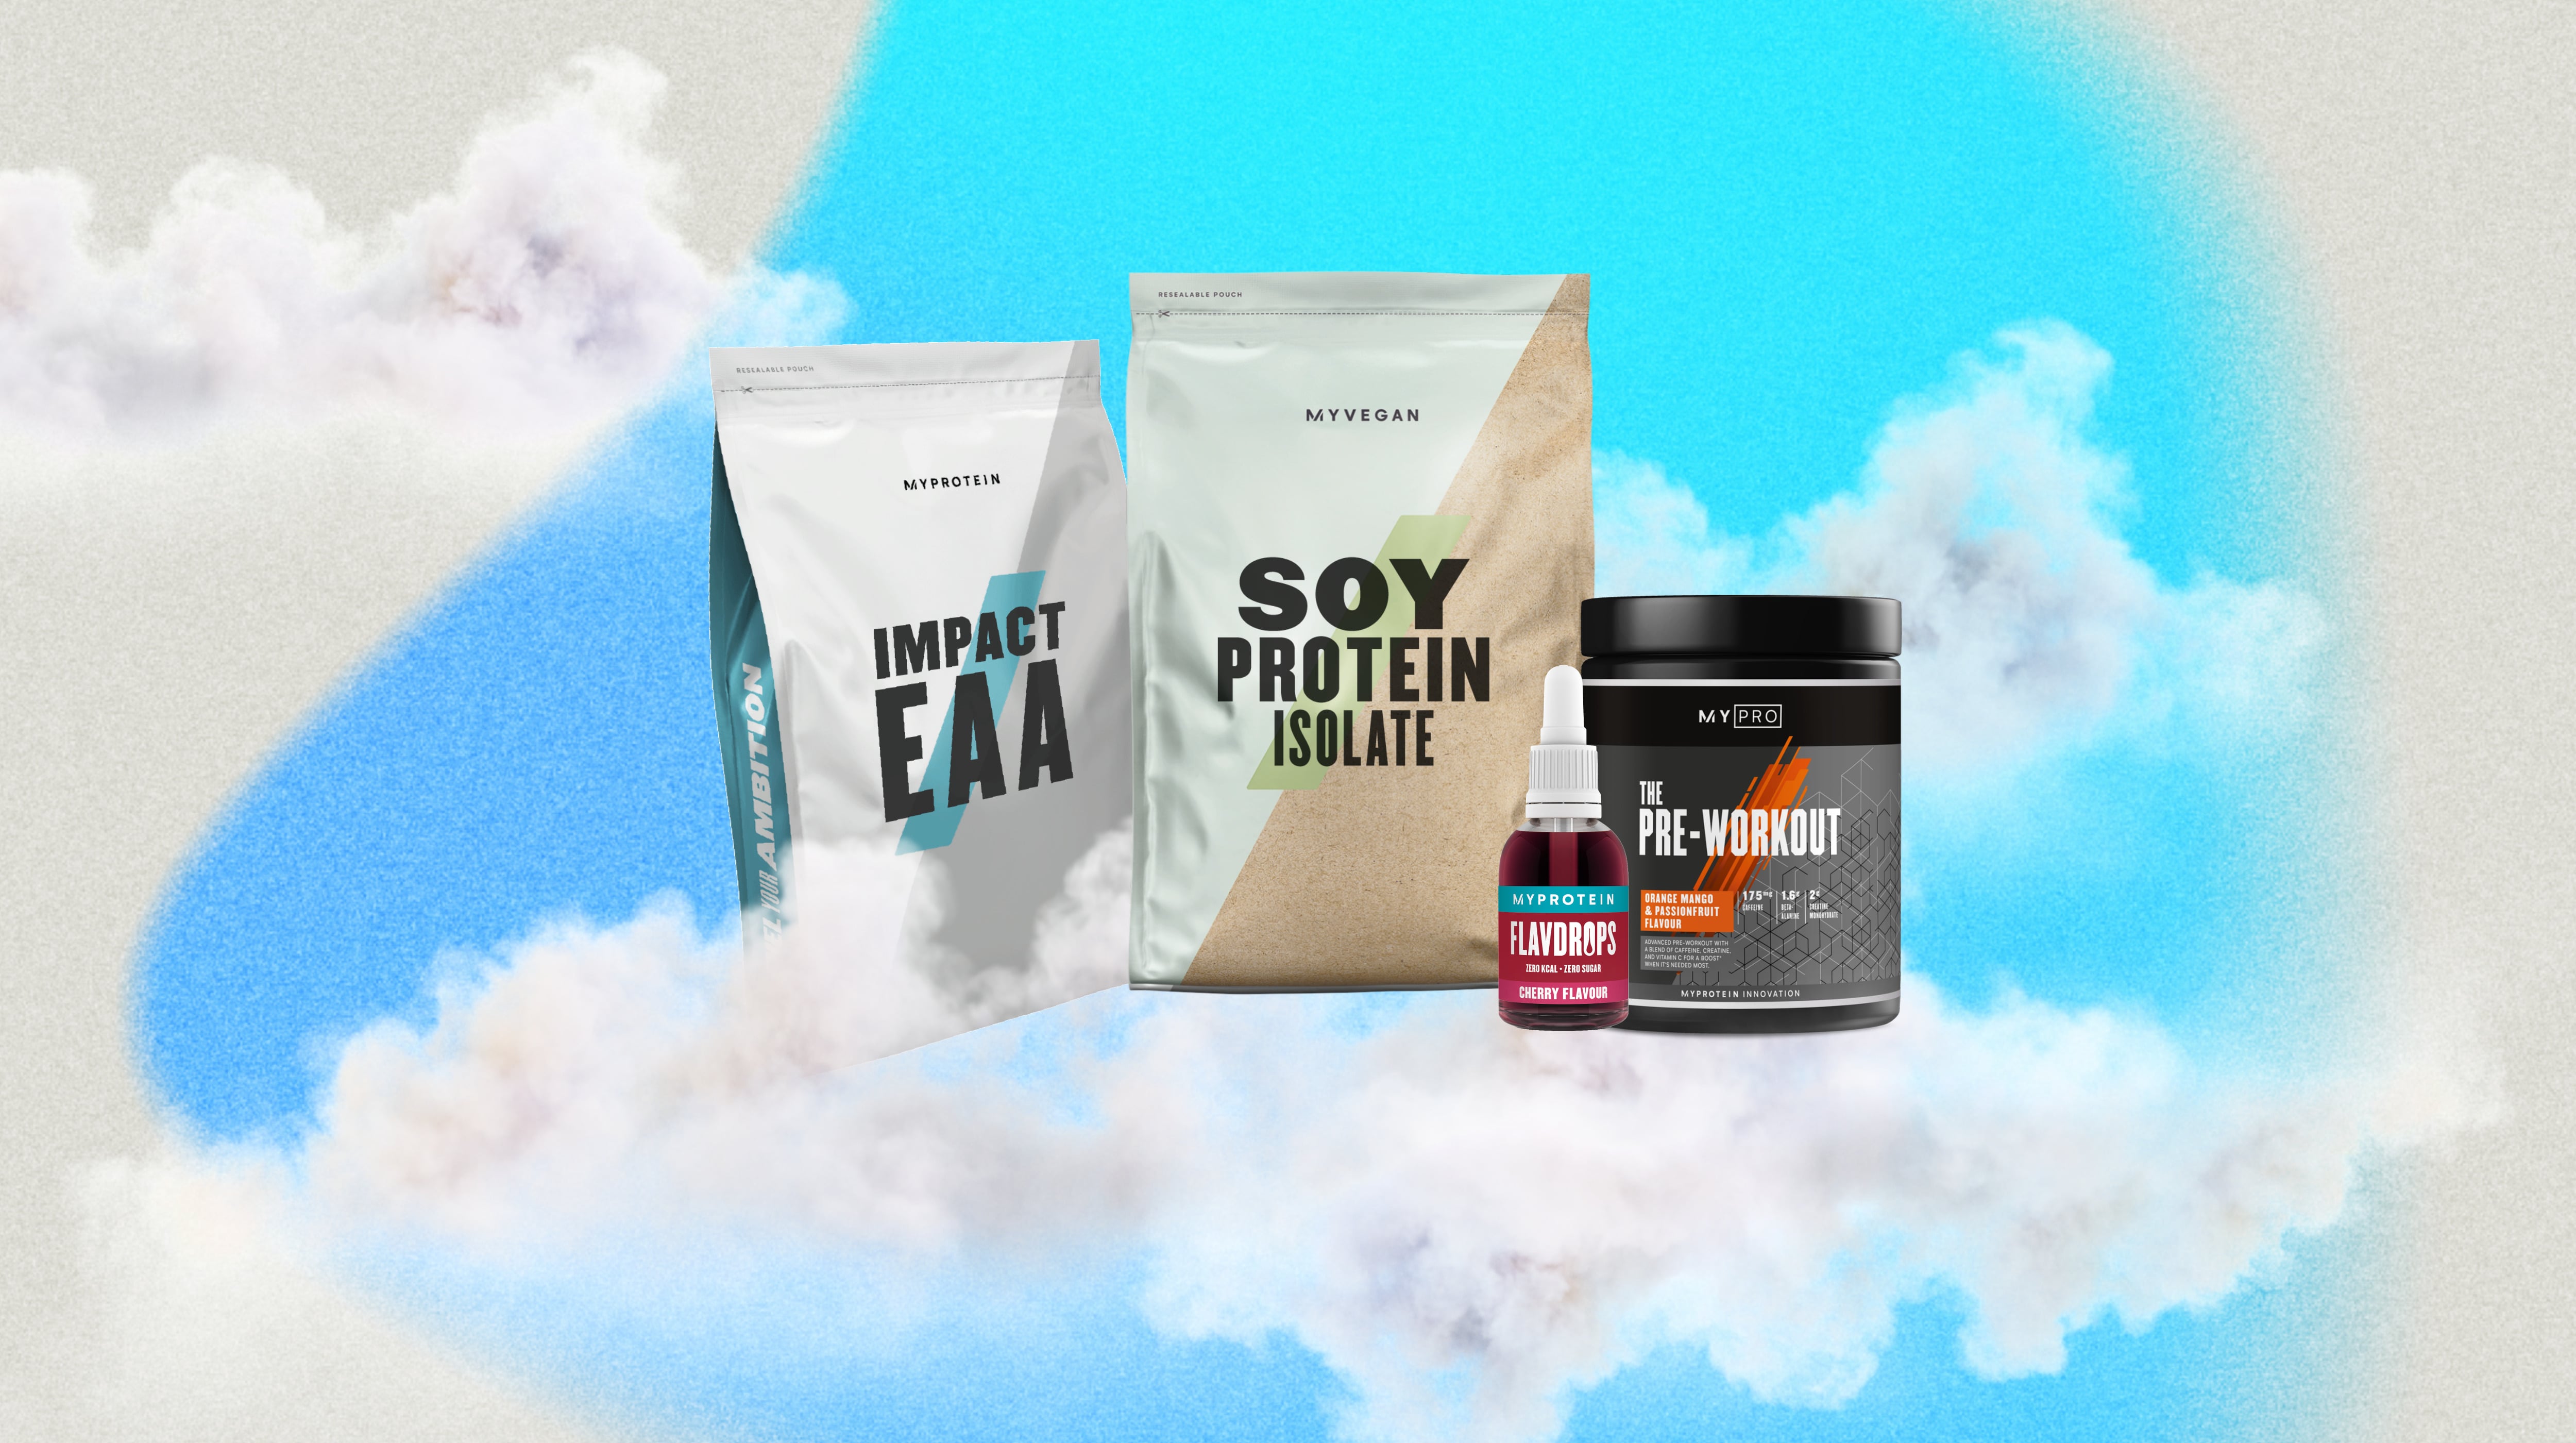 What To Buy This Black Friday | Myprotein Black Friday Supplement, Health & Nutrition Deals